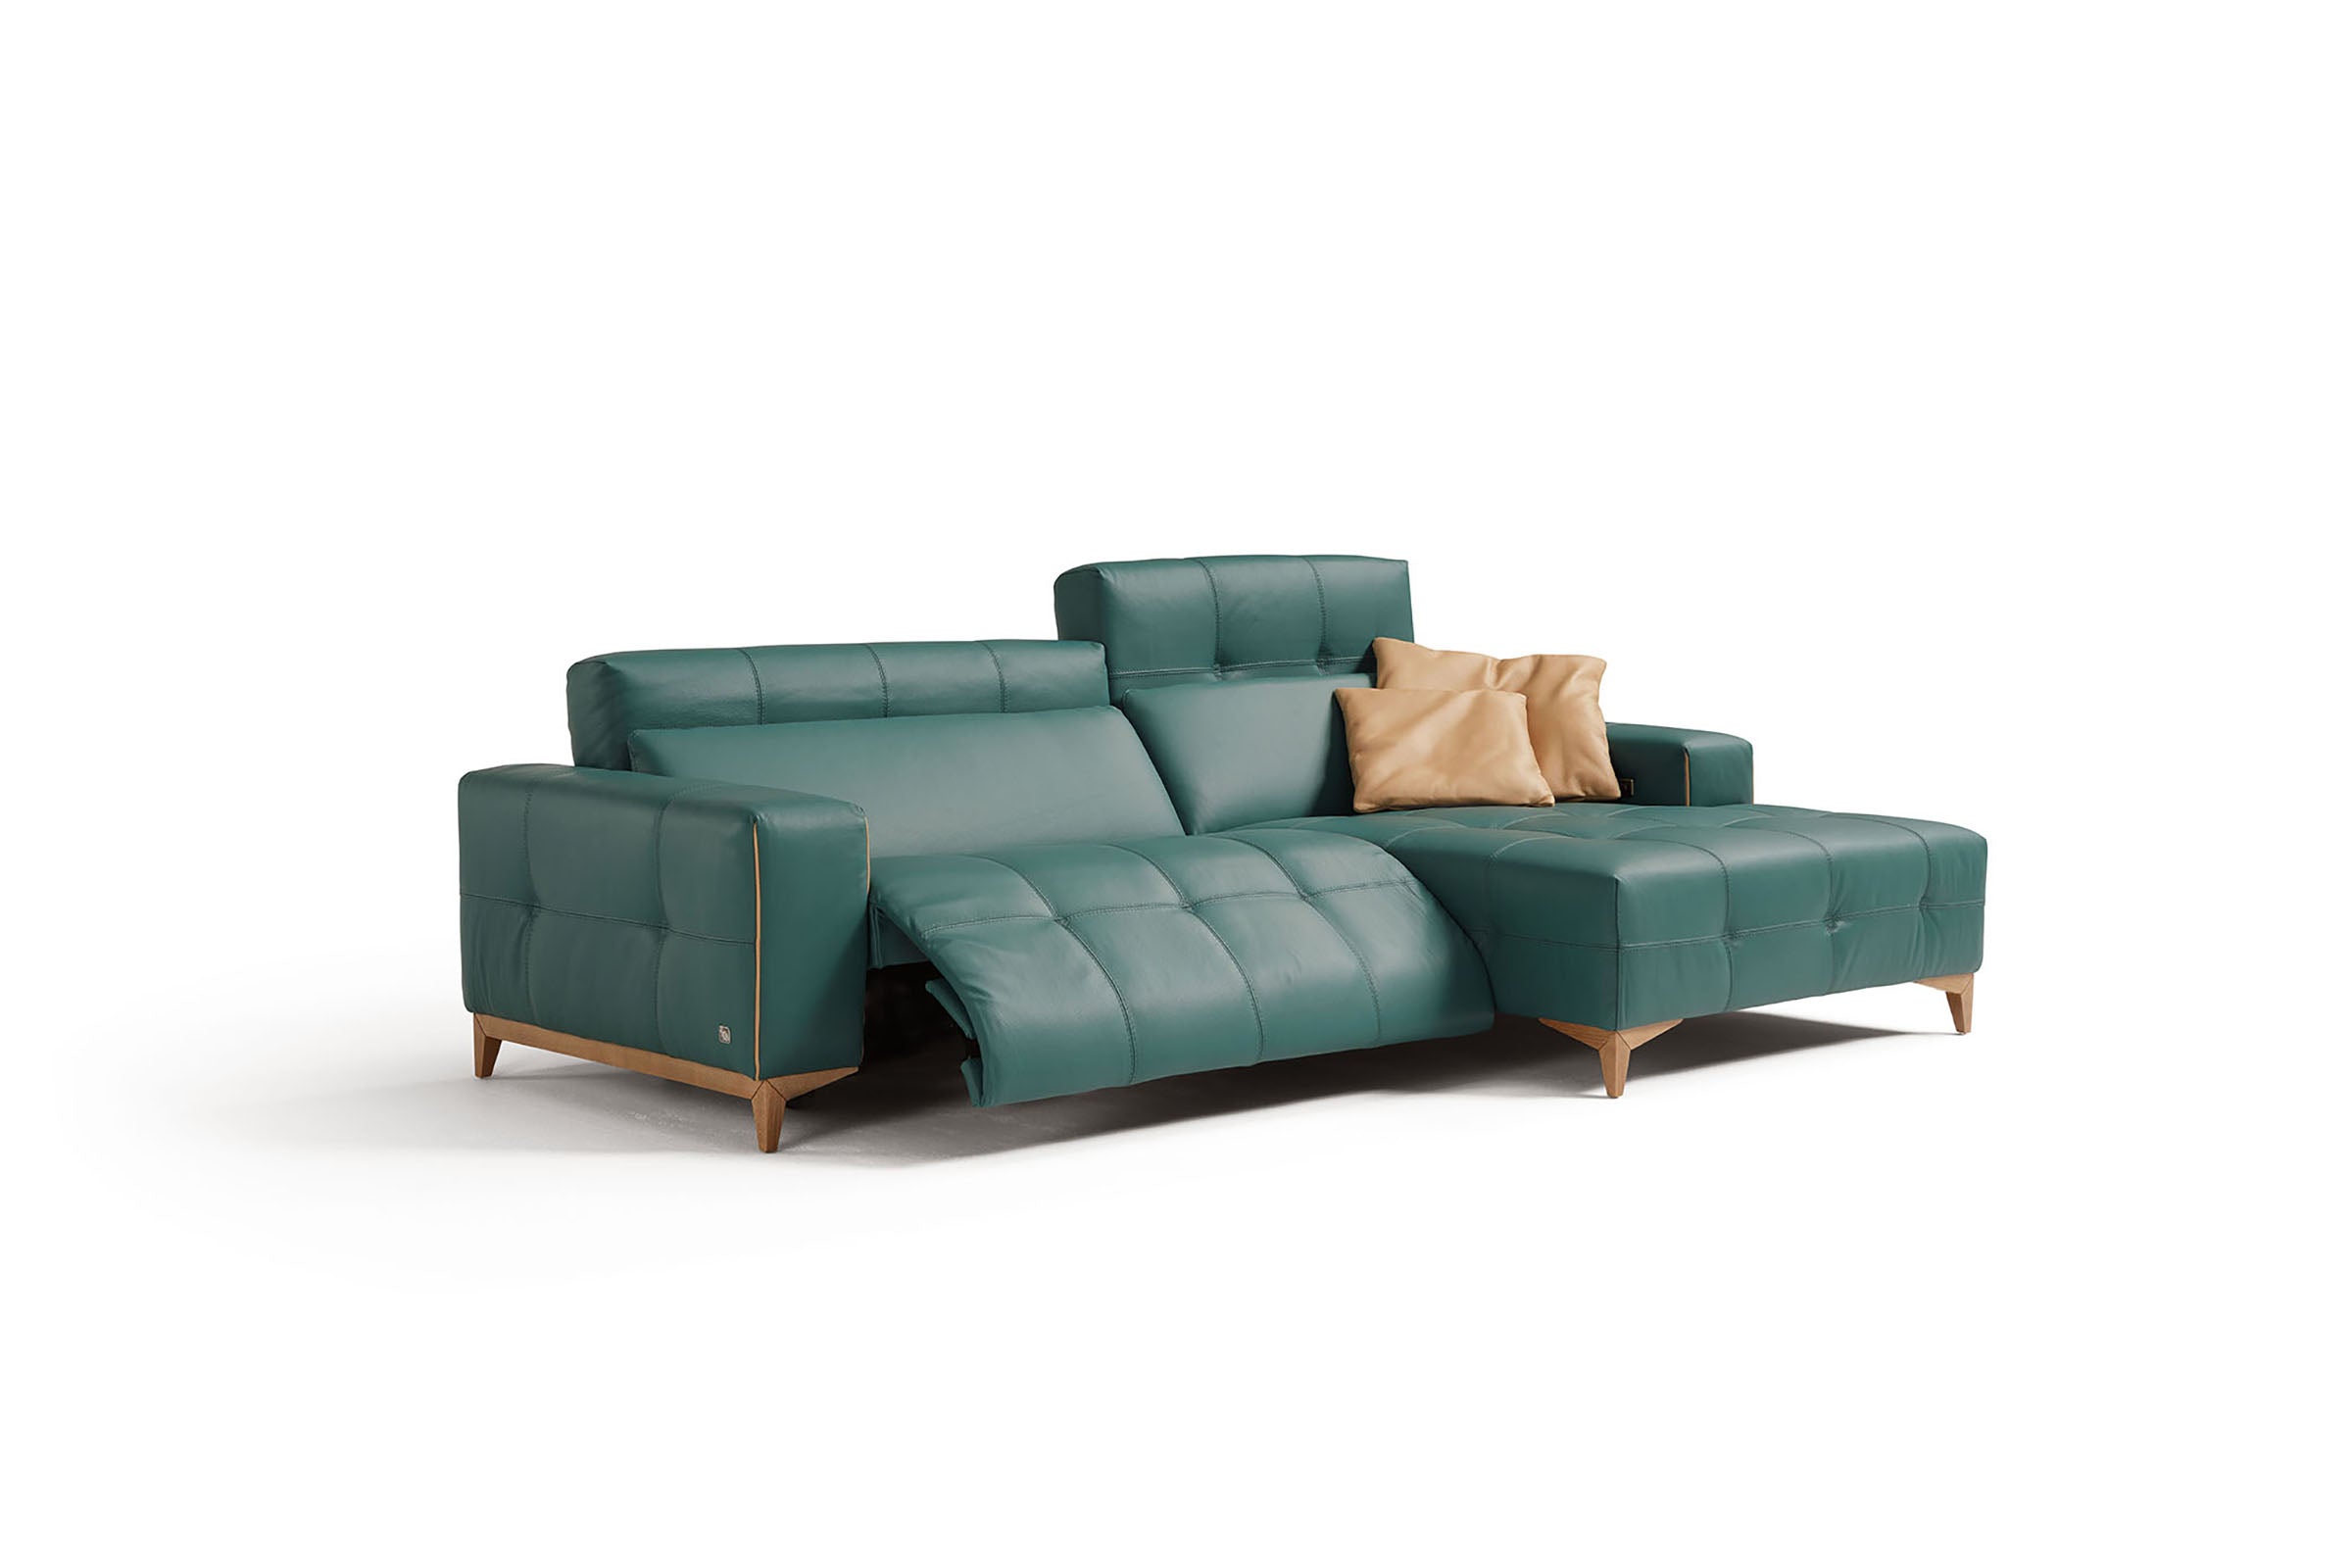 Tiffany small sofa with chaise